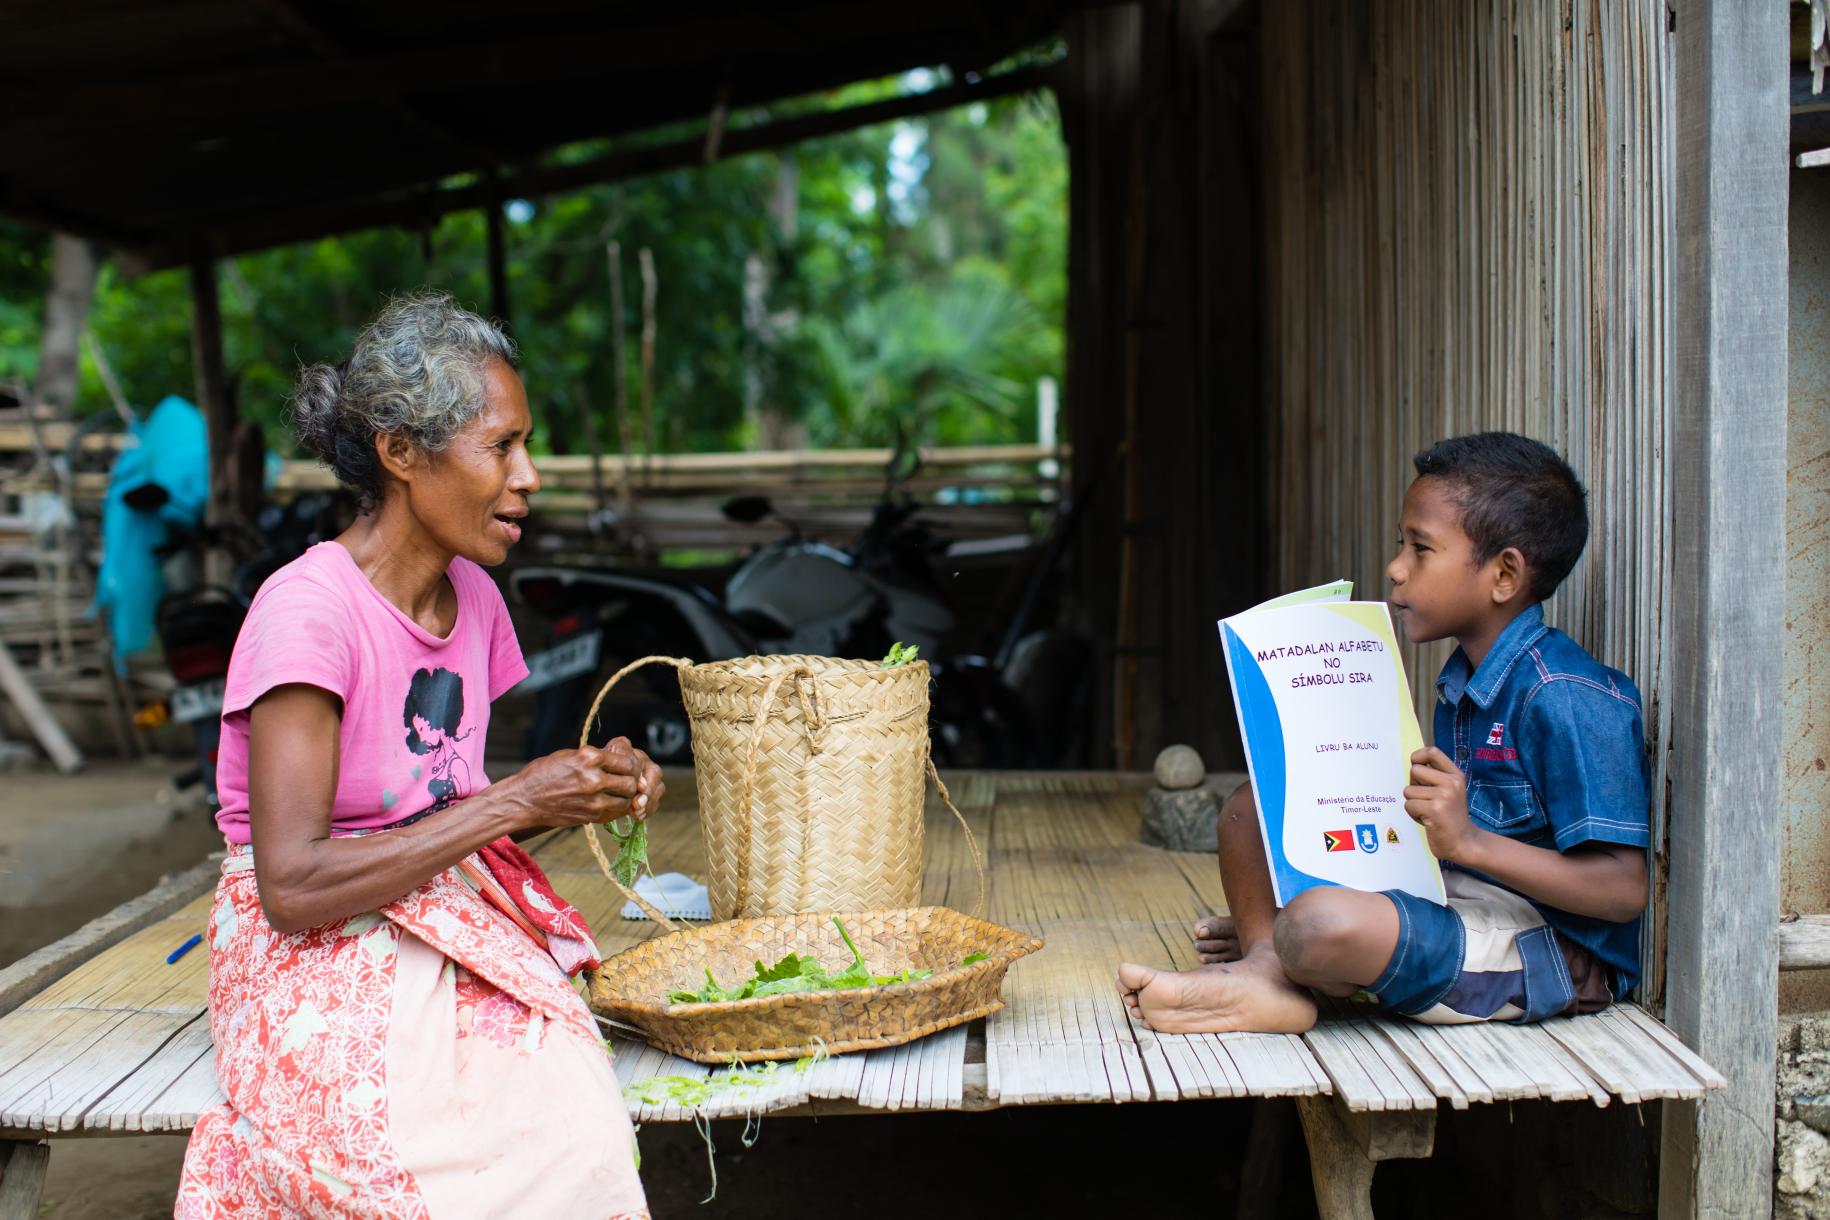 The UN country team have been supporting the Government of Timor-Leste overcome the issue of malnutrition and stunting- one of the country's most persistent development challenges. Photo: © RCO Timor-Leste